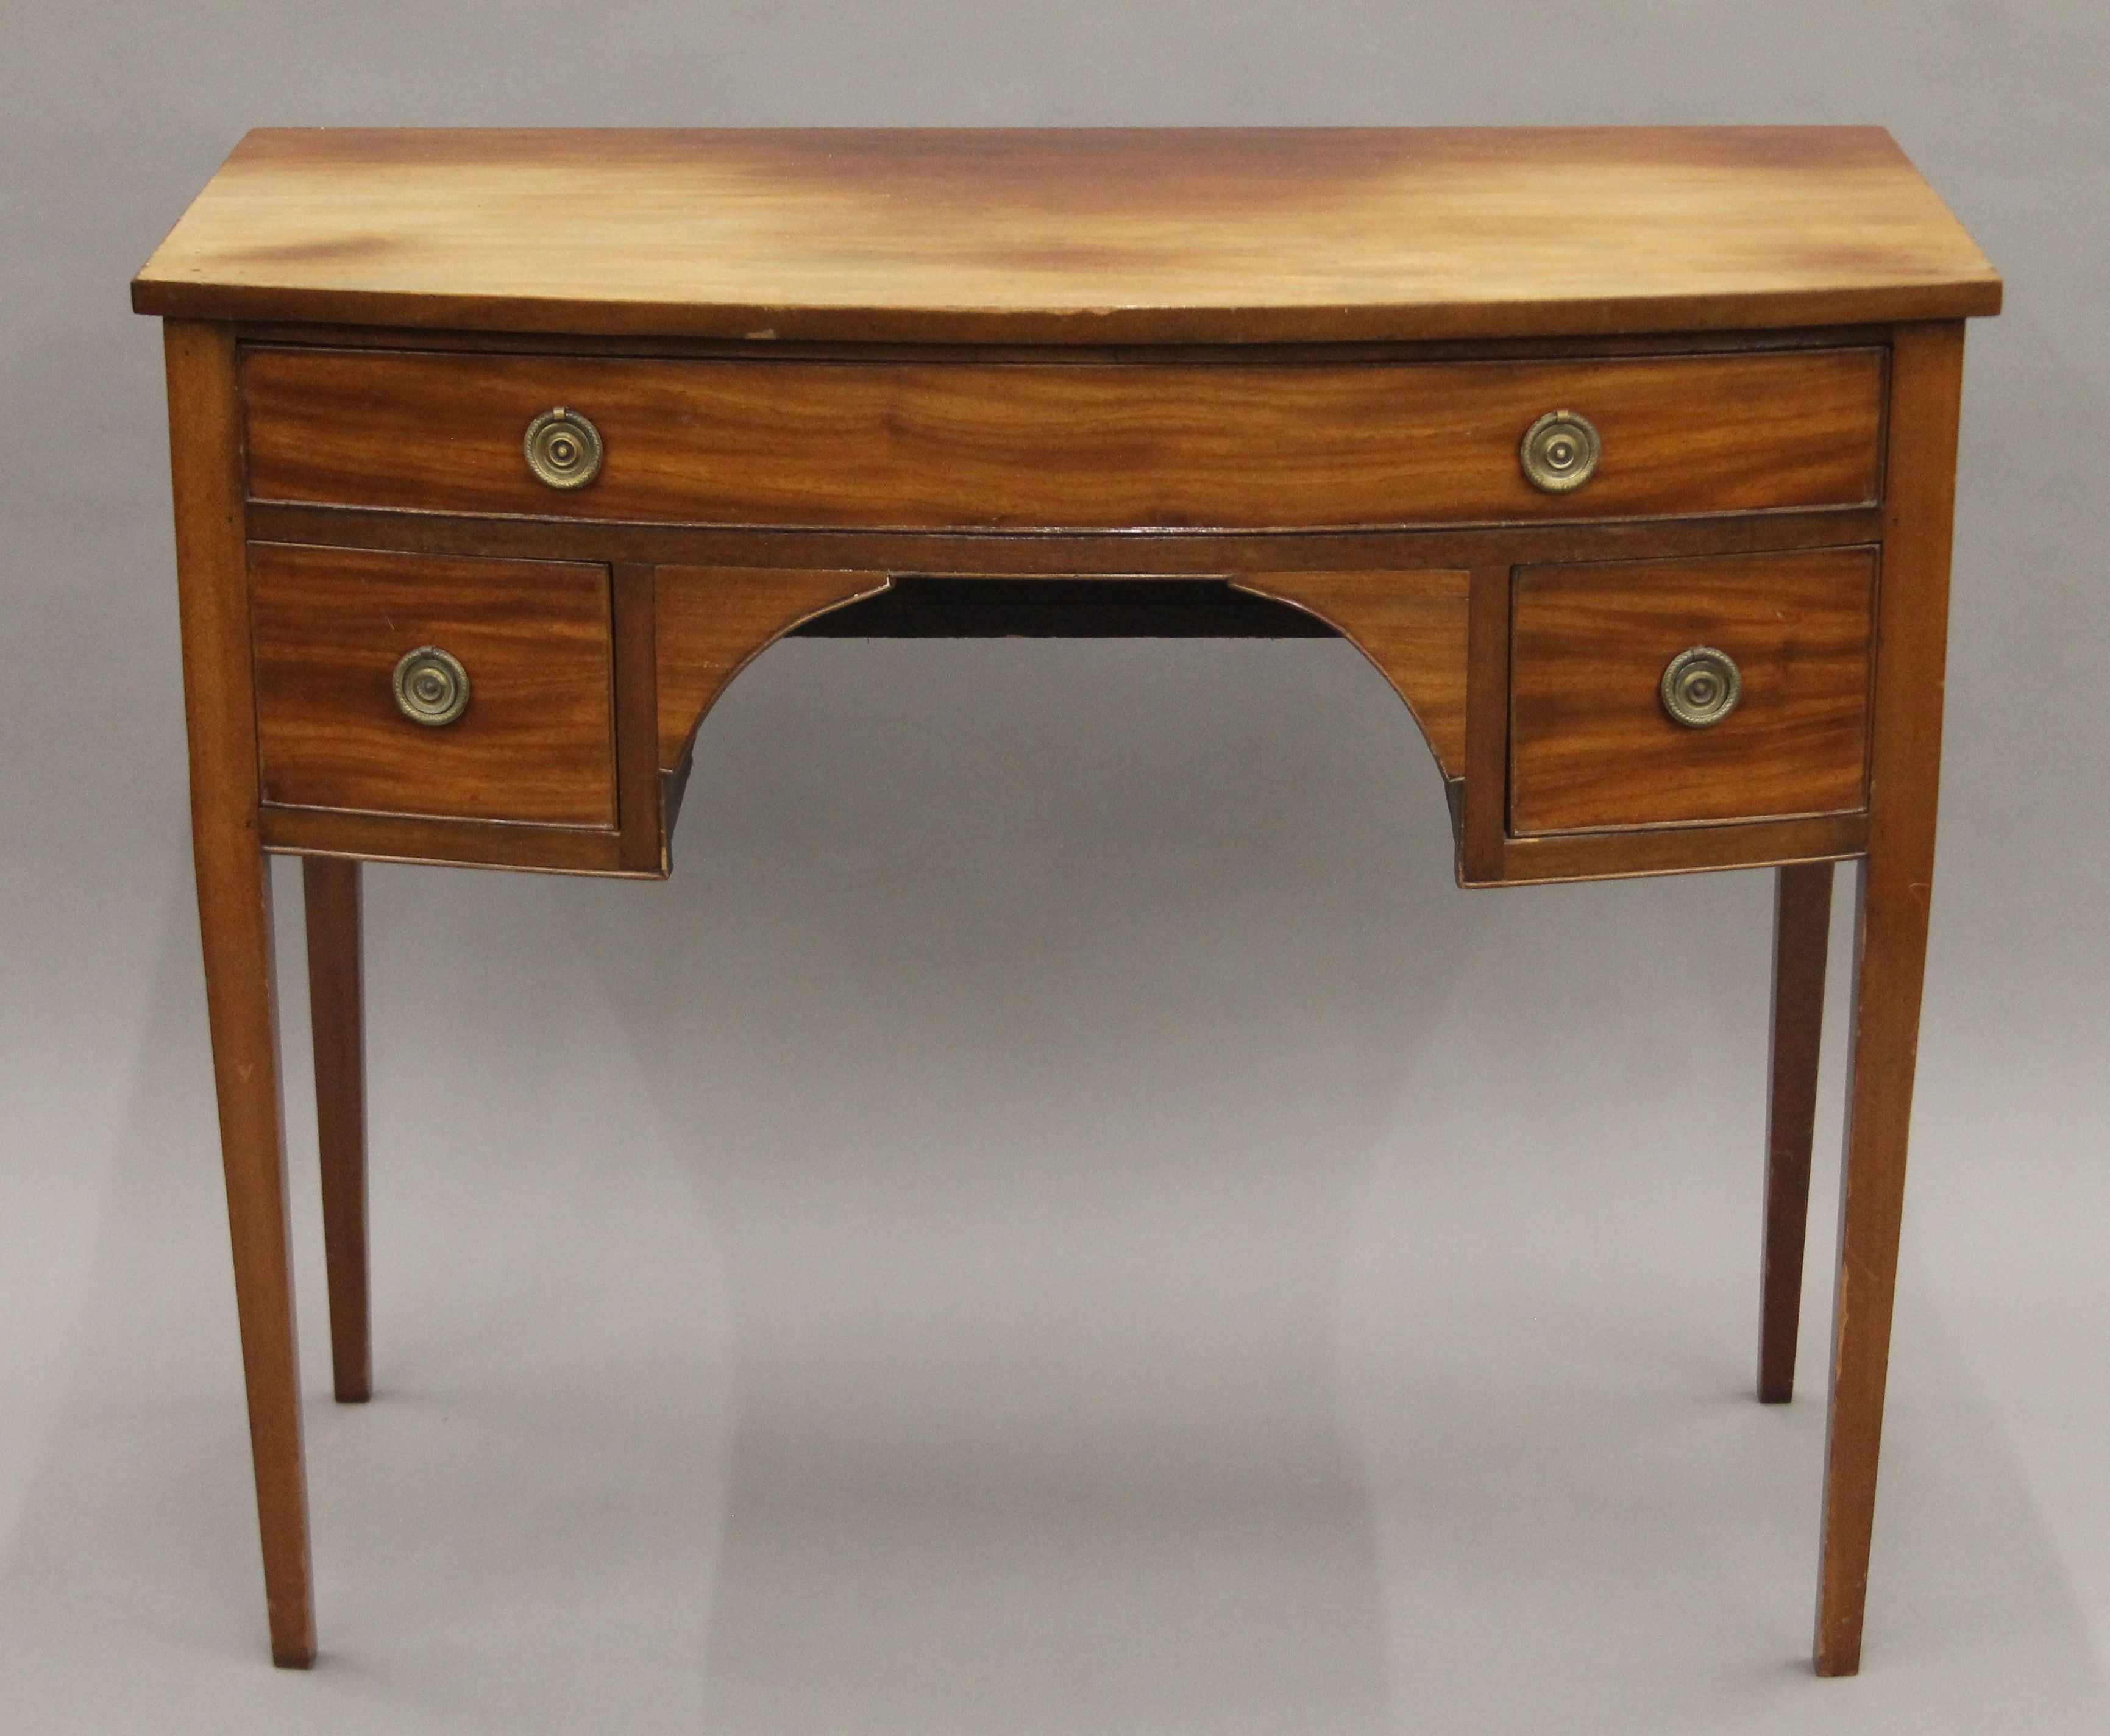 A 19th century mahogany bow front side table. 100 cm wide.